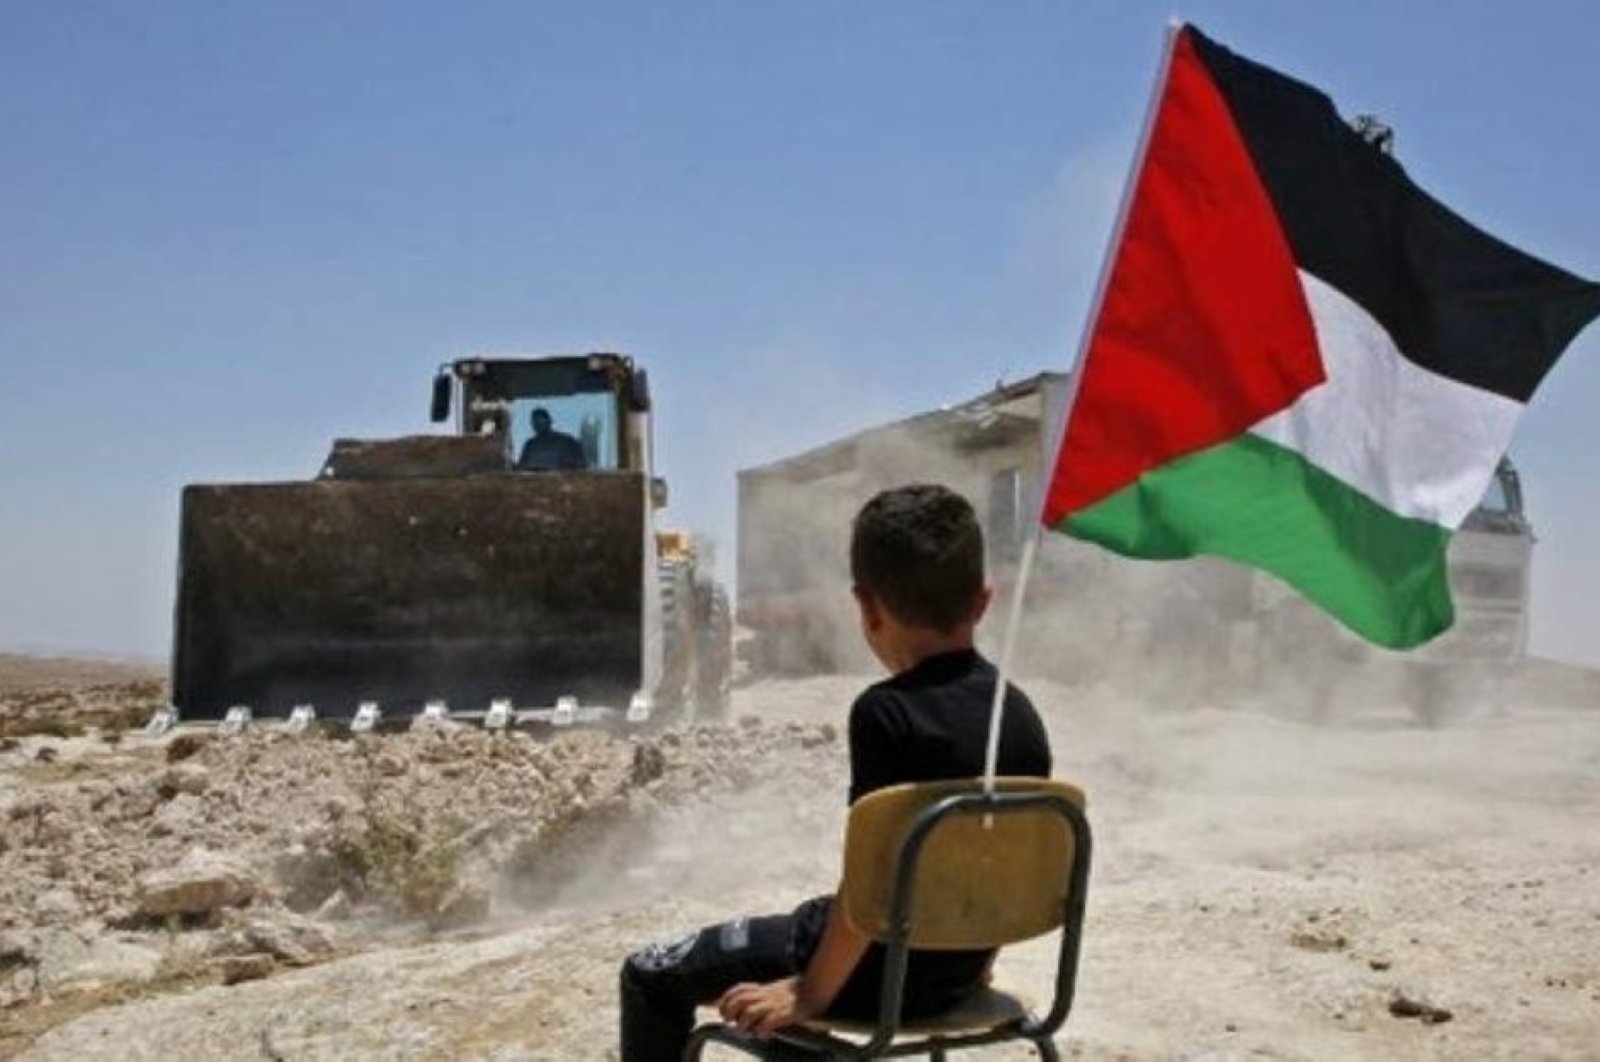 A Palestinian boy sits on a chair with a national flag as Israeli authorities demolish a school site in the village of Yatta in the occupied West Bank, July 11, 2018. (AFP Photo)